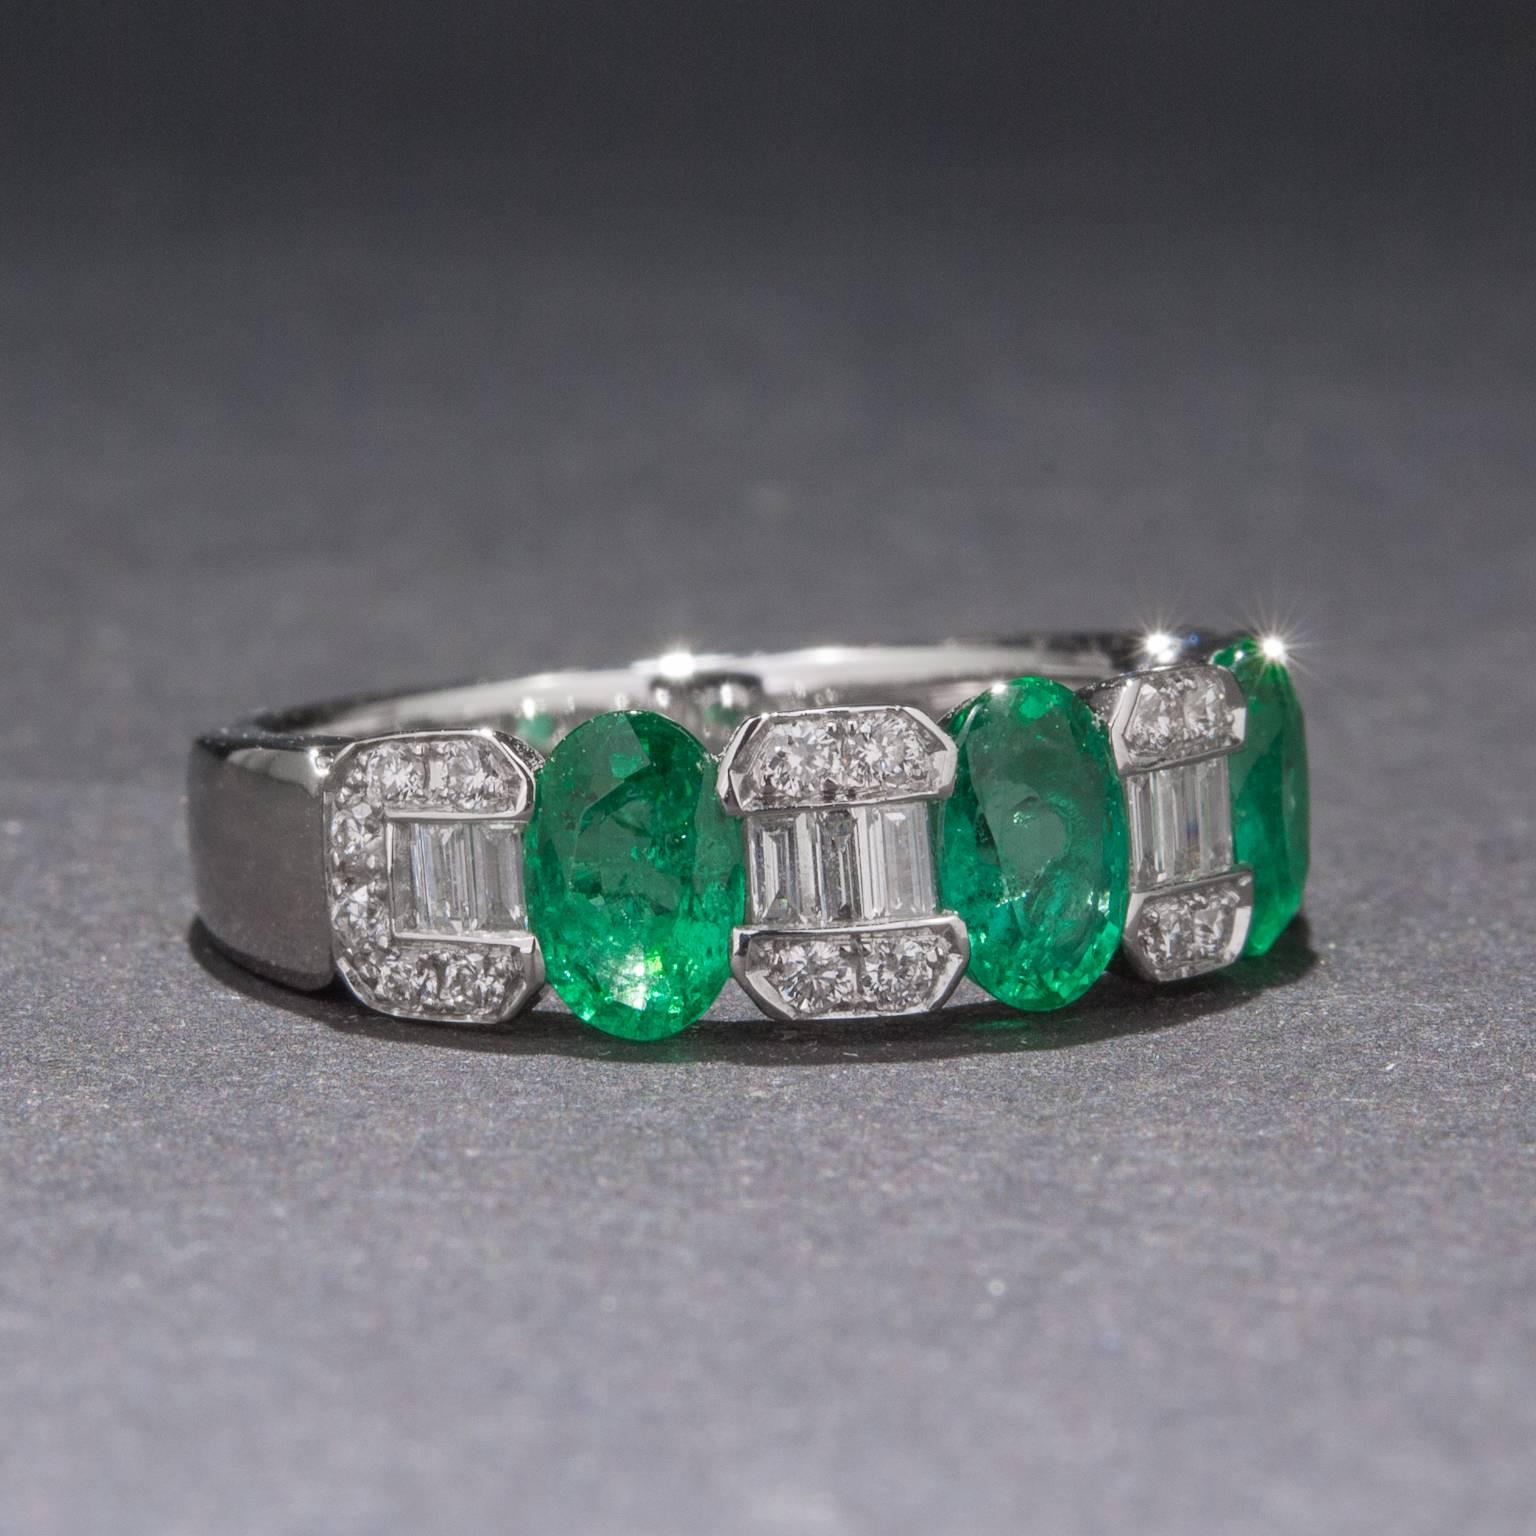 A stunning emerald and diamond band featuring 3 emeralds weighing a total of 1.24 carats. The ring also includes 10 baguette diamonds for a total of .18 carats and 20 round diamonds for an additional .18 carats. This lovely ring is made in 18k white